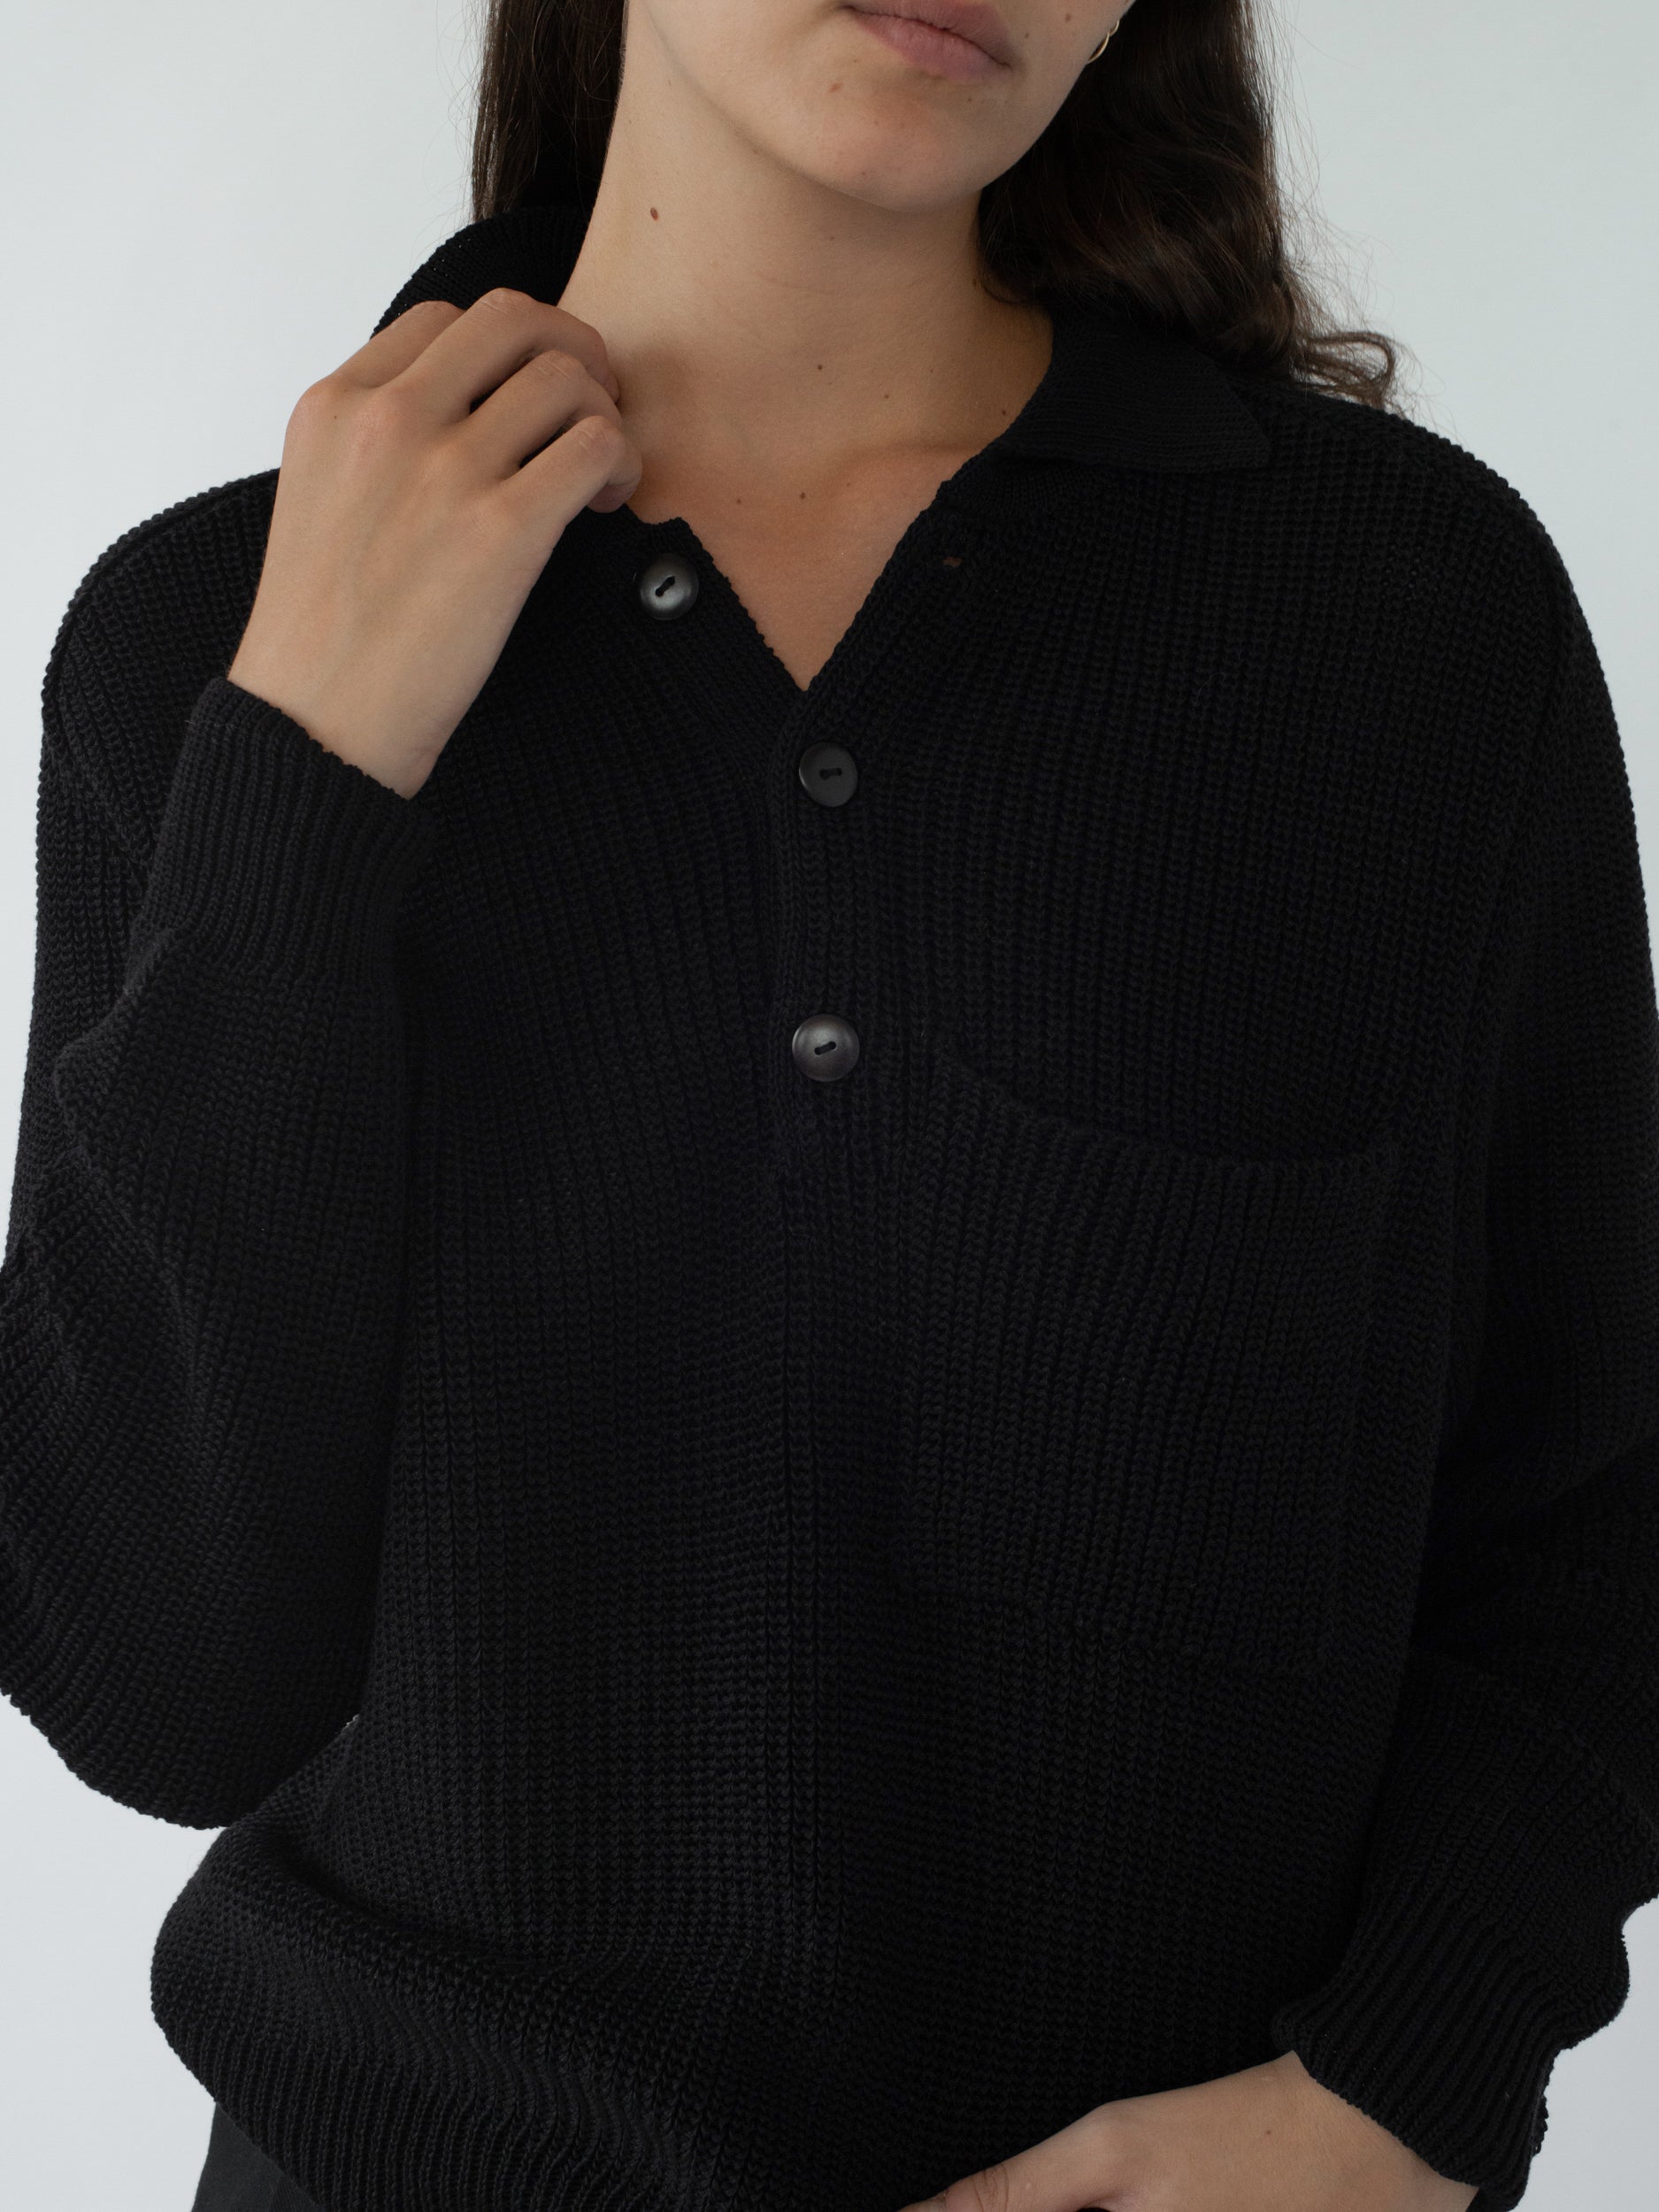 Thumbnail image of Saatchi Sweater in Onyx